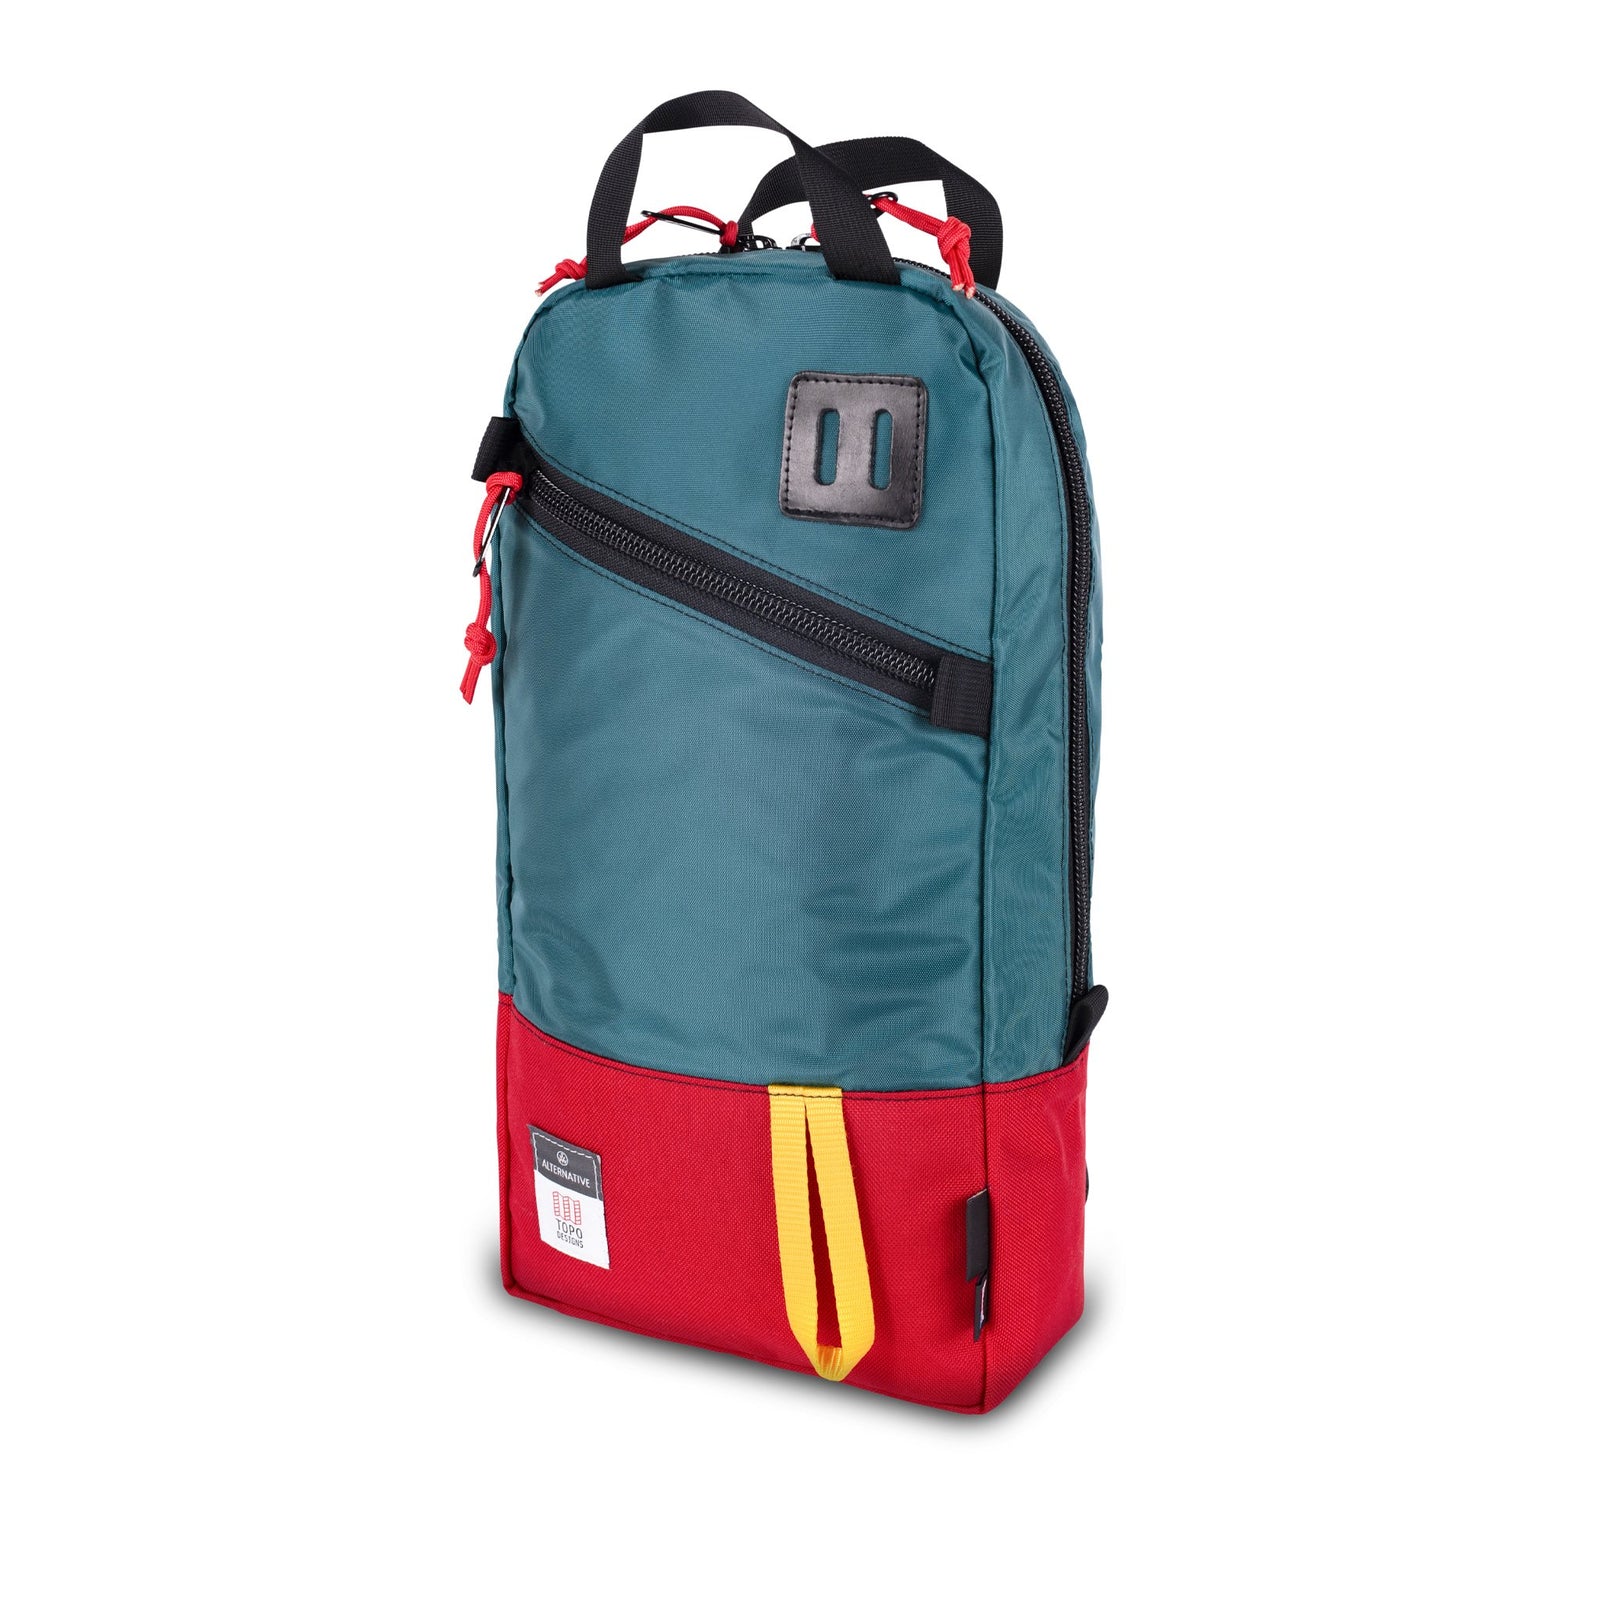 3/4 front product shot of Topo Designs x Alternative Trip Pack in red/teal